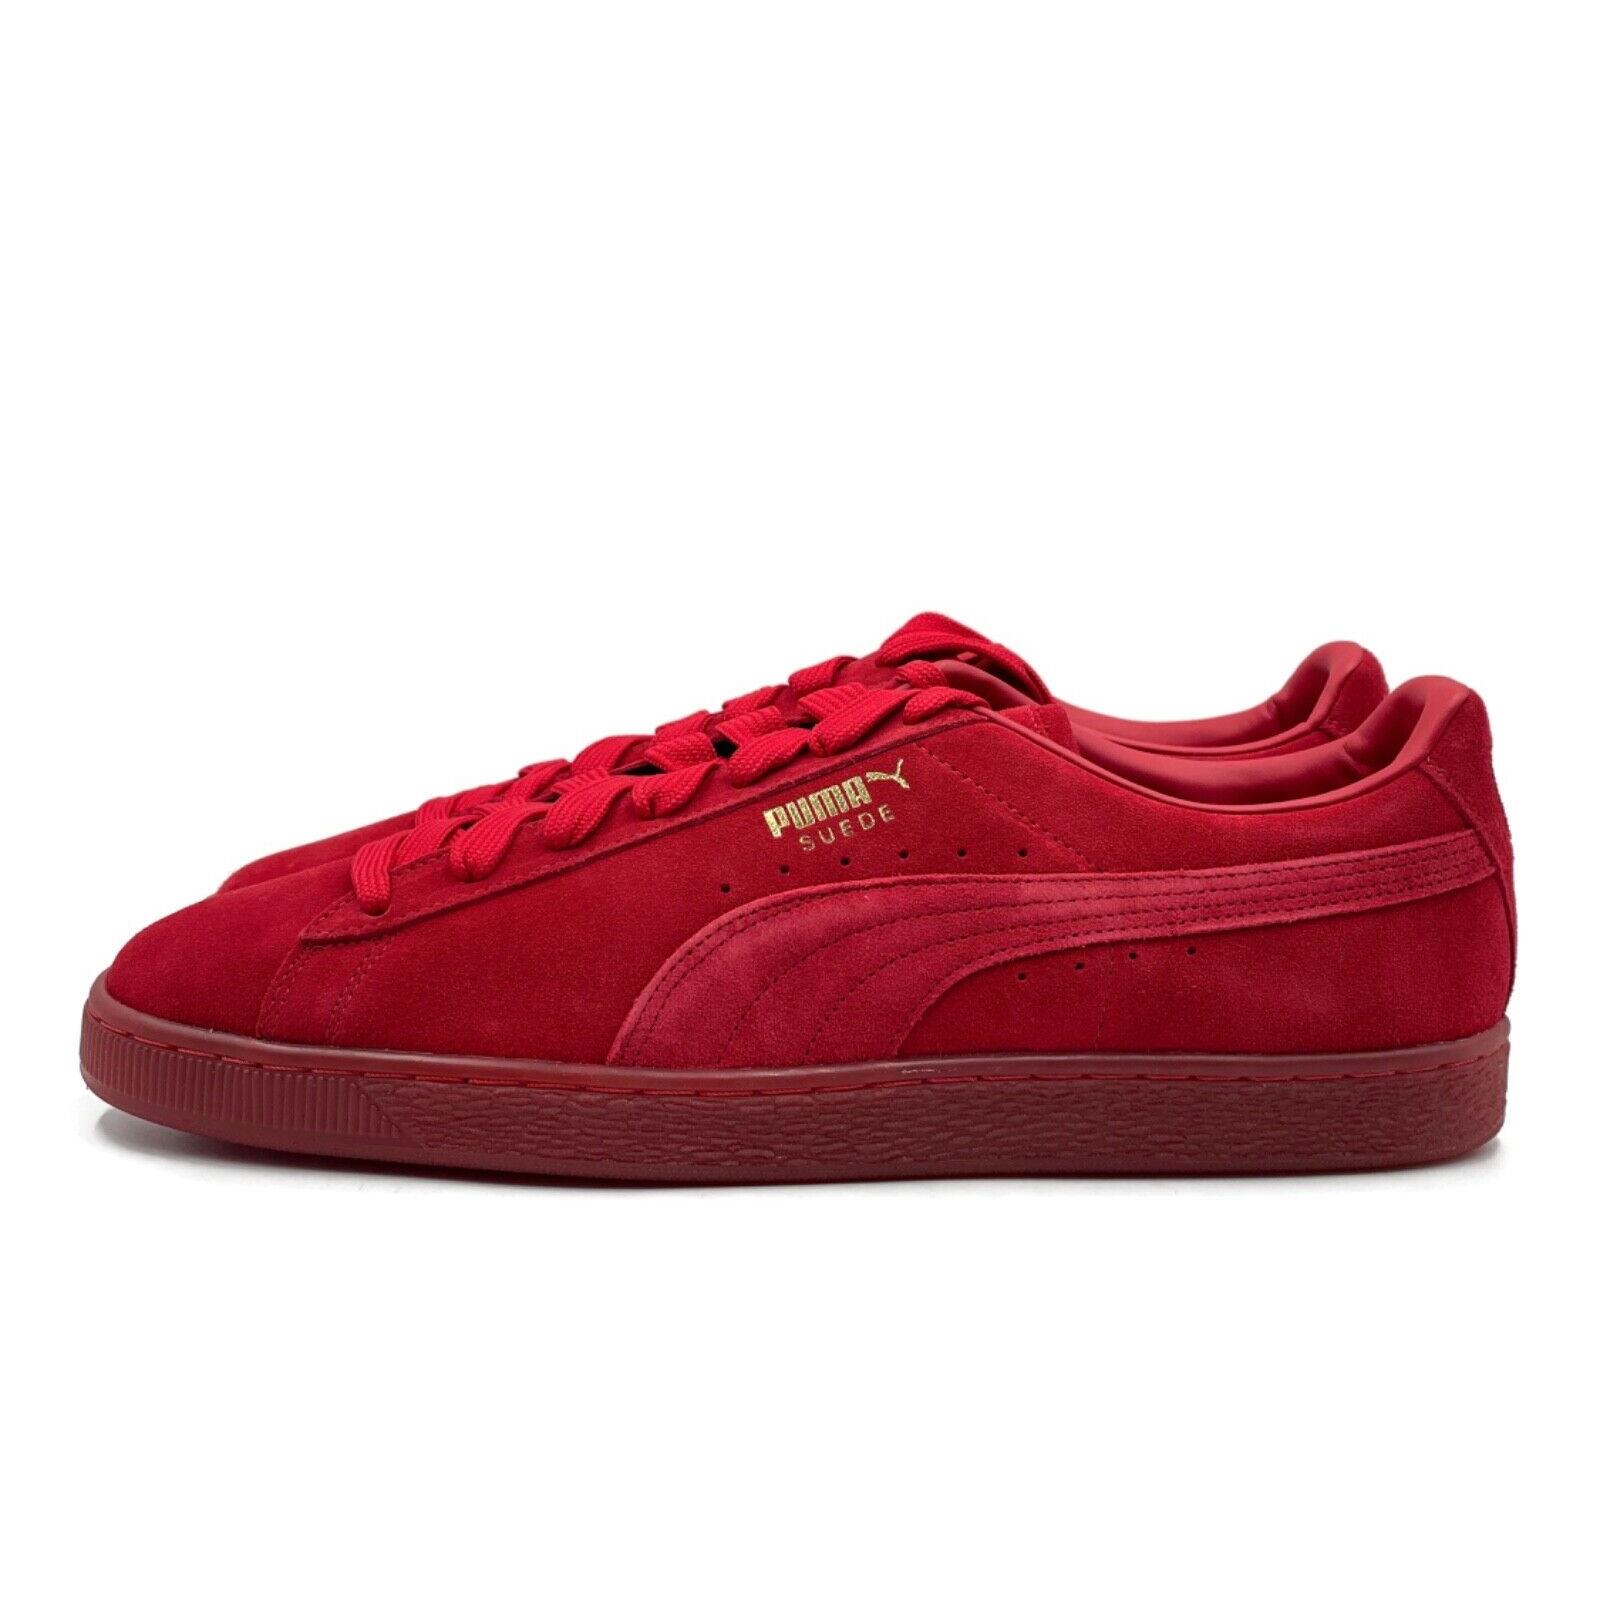 Puma shoes Suede Classic Mono Gold - Red Gold 6